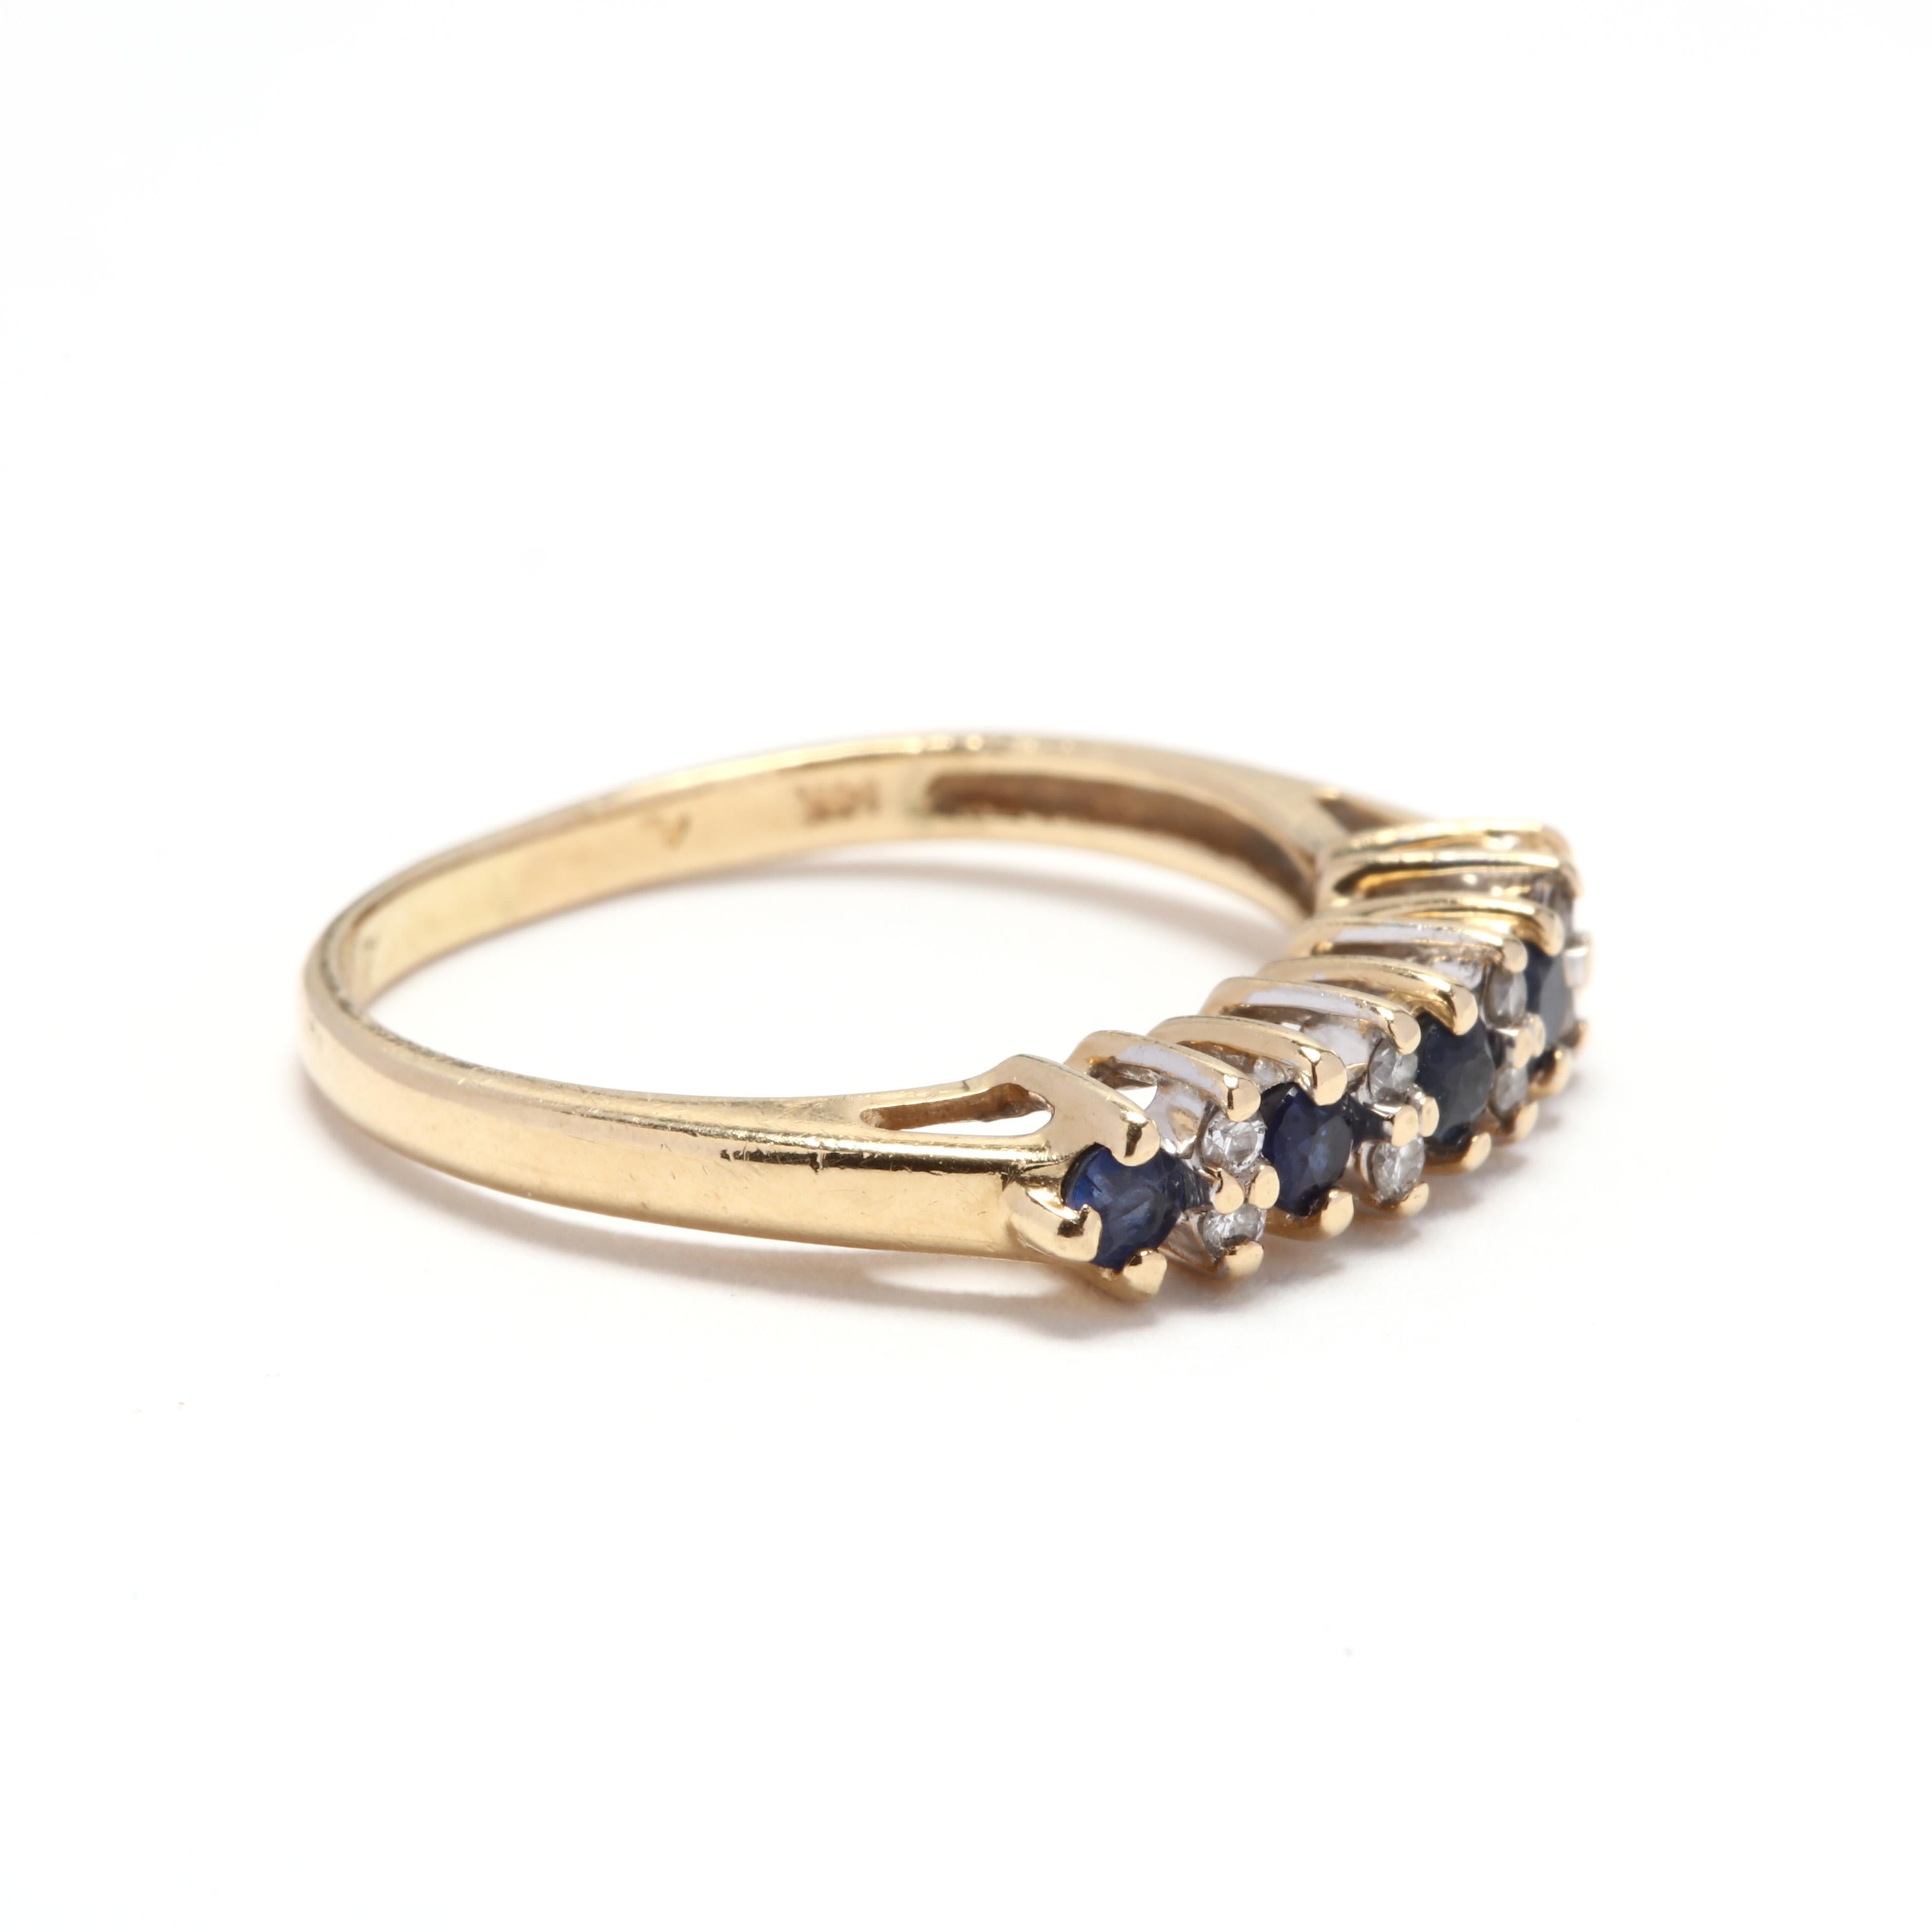 A 14 karat yellow gold, sapphire and diamond band ring. A prong set gemstone band with alternating round cut sapphires and diamonds. Special anniversary ring or special occasion ring.

Stones:
- sapphires, 5 stones
- round
- 2 - 2.25 mm
-